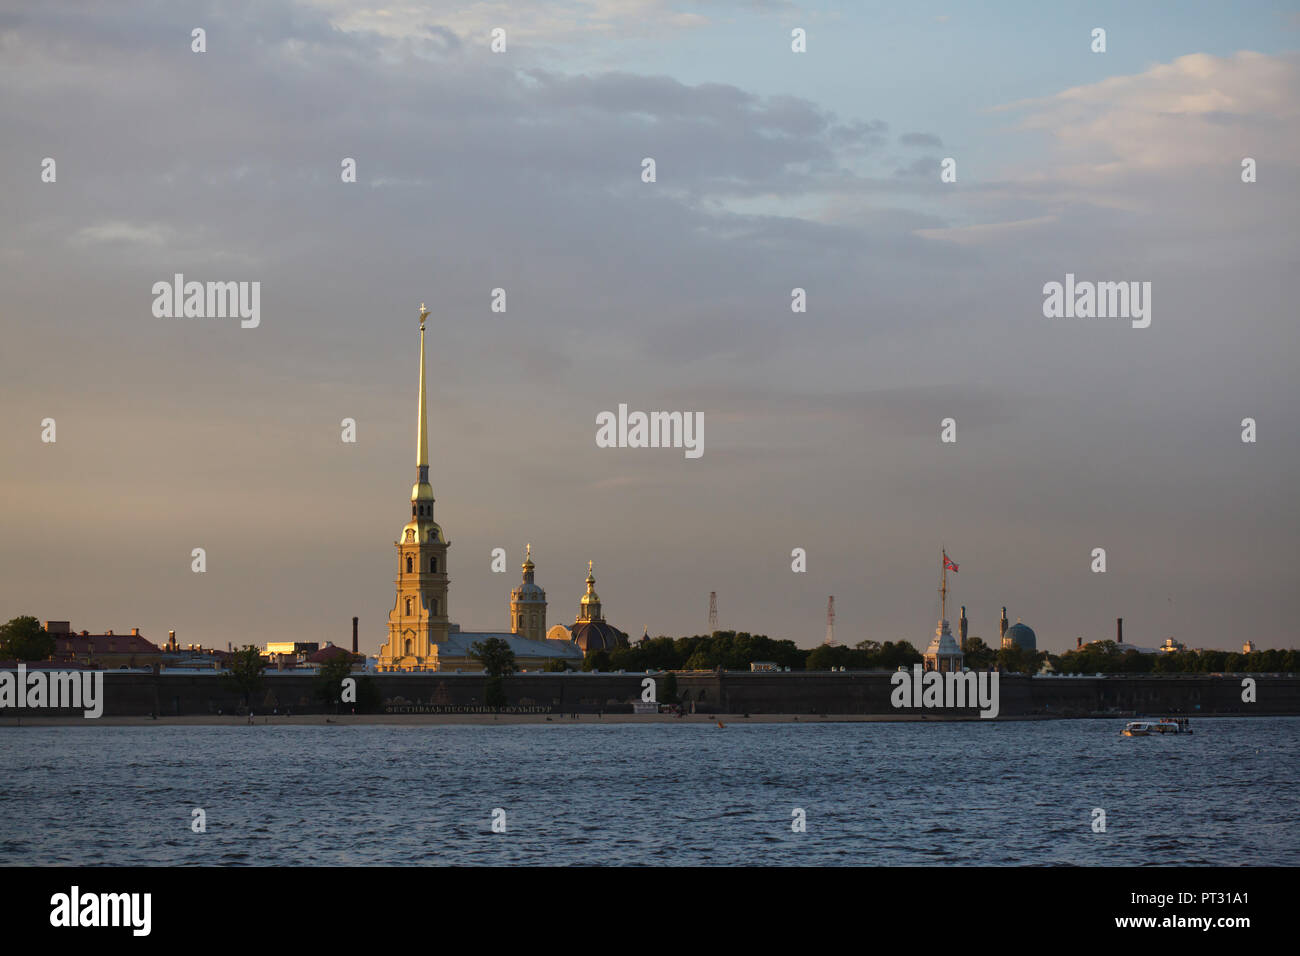 Saints Peter and Paul Cathedral designed by Italian Baroque architect Domenico Trezzini in Peter and Paul Fortress in Saint Petersburg, Russia, pictured at sunset. Stock Photo